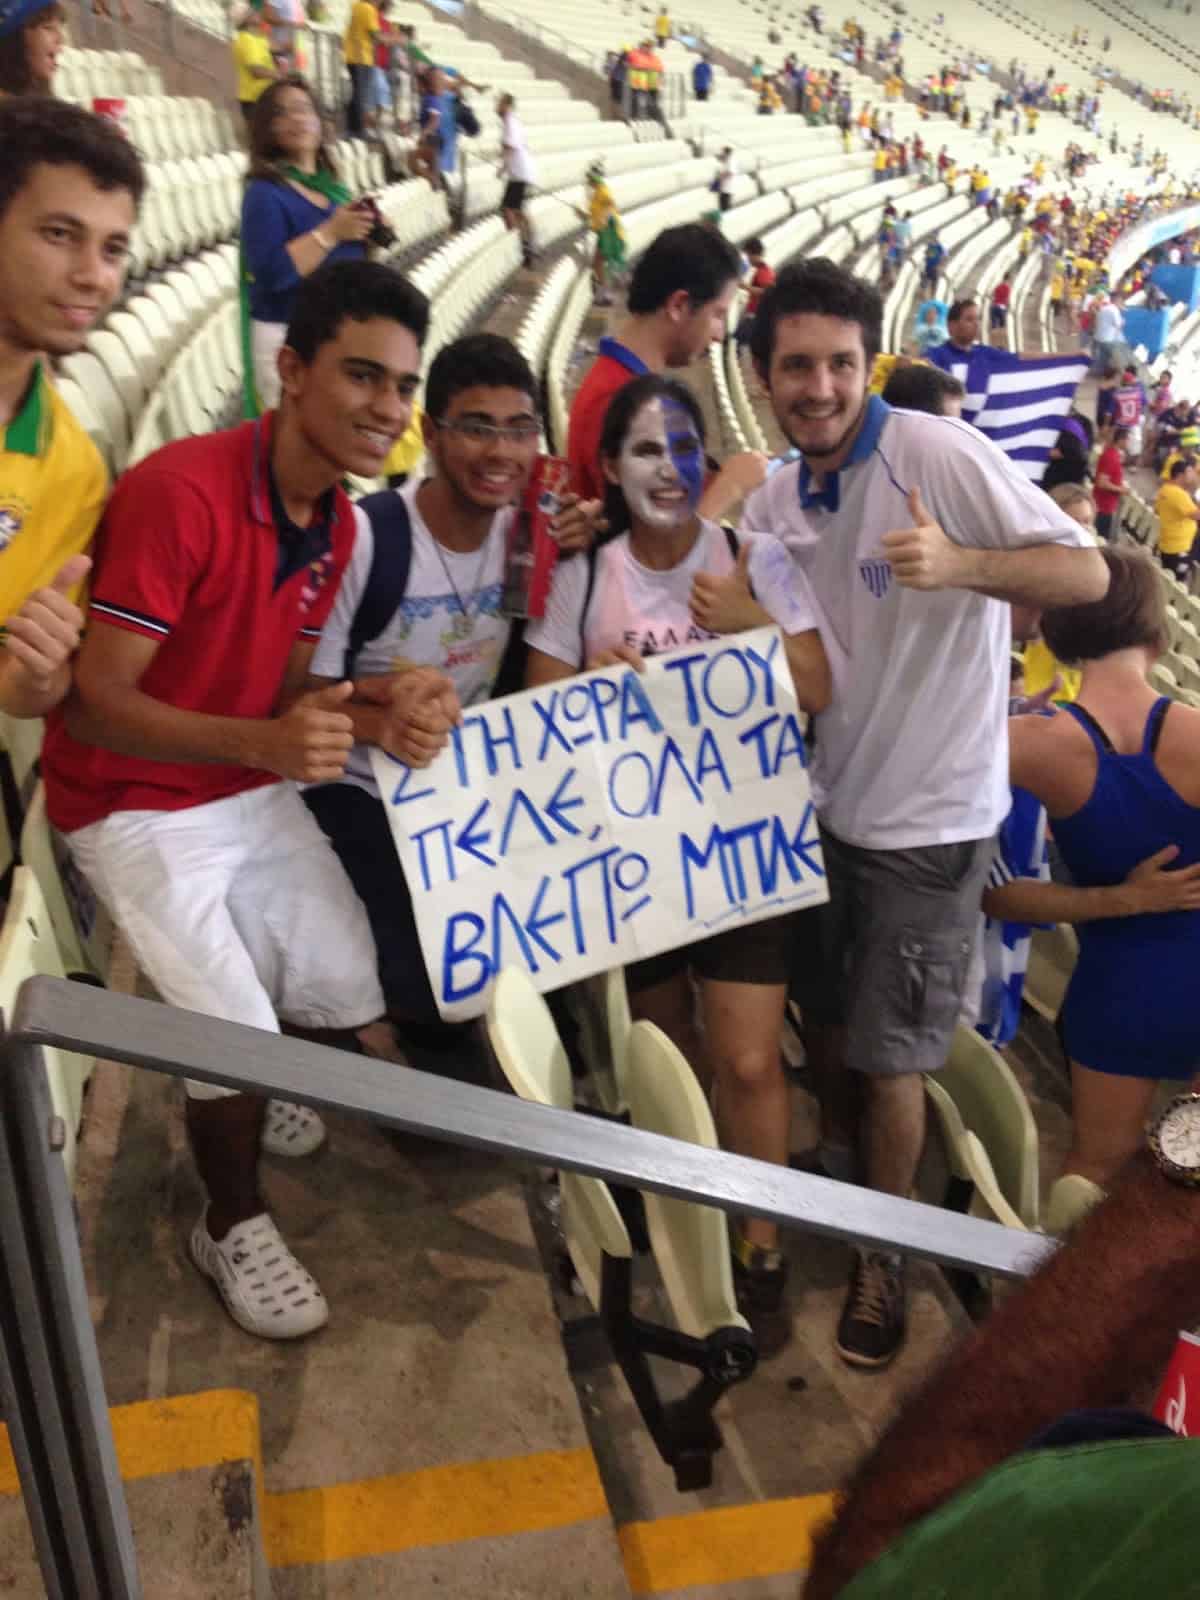 Celebrating after the game at the Greece vs Côte d'Ivoire game in the 2014 World Cup at Arena Castelão in Fortaleza, Brazil